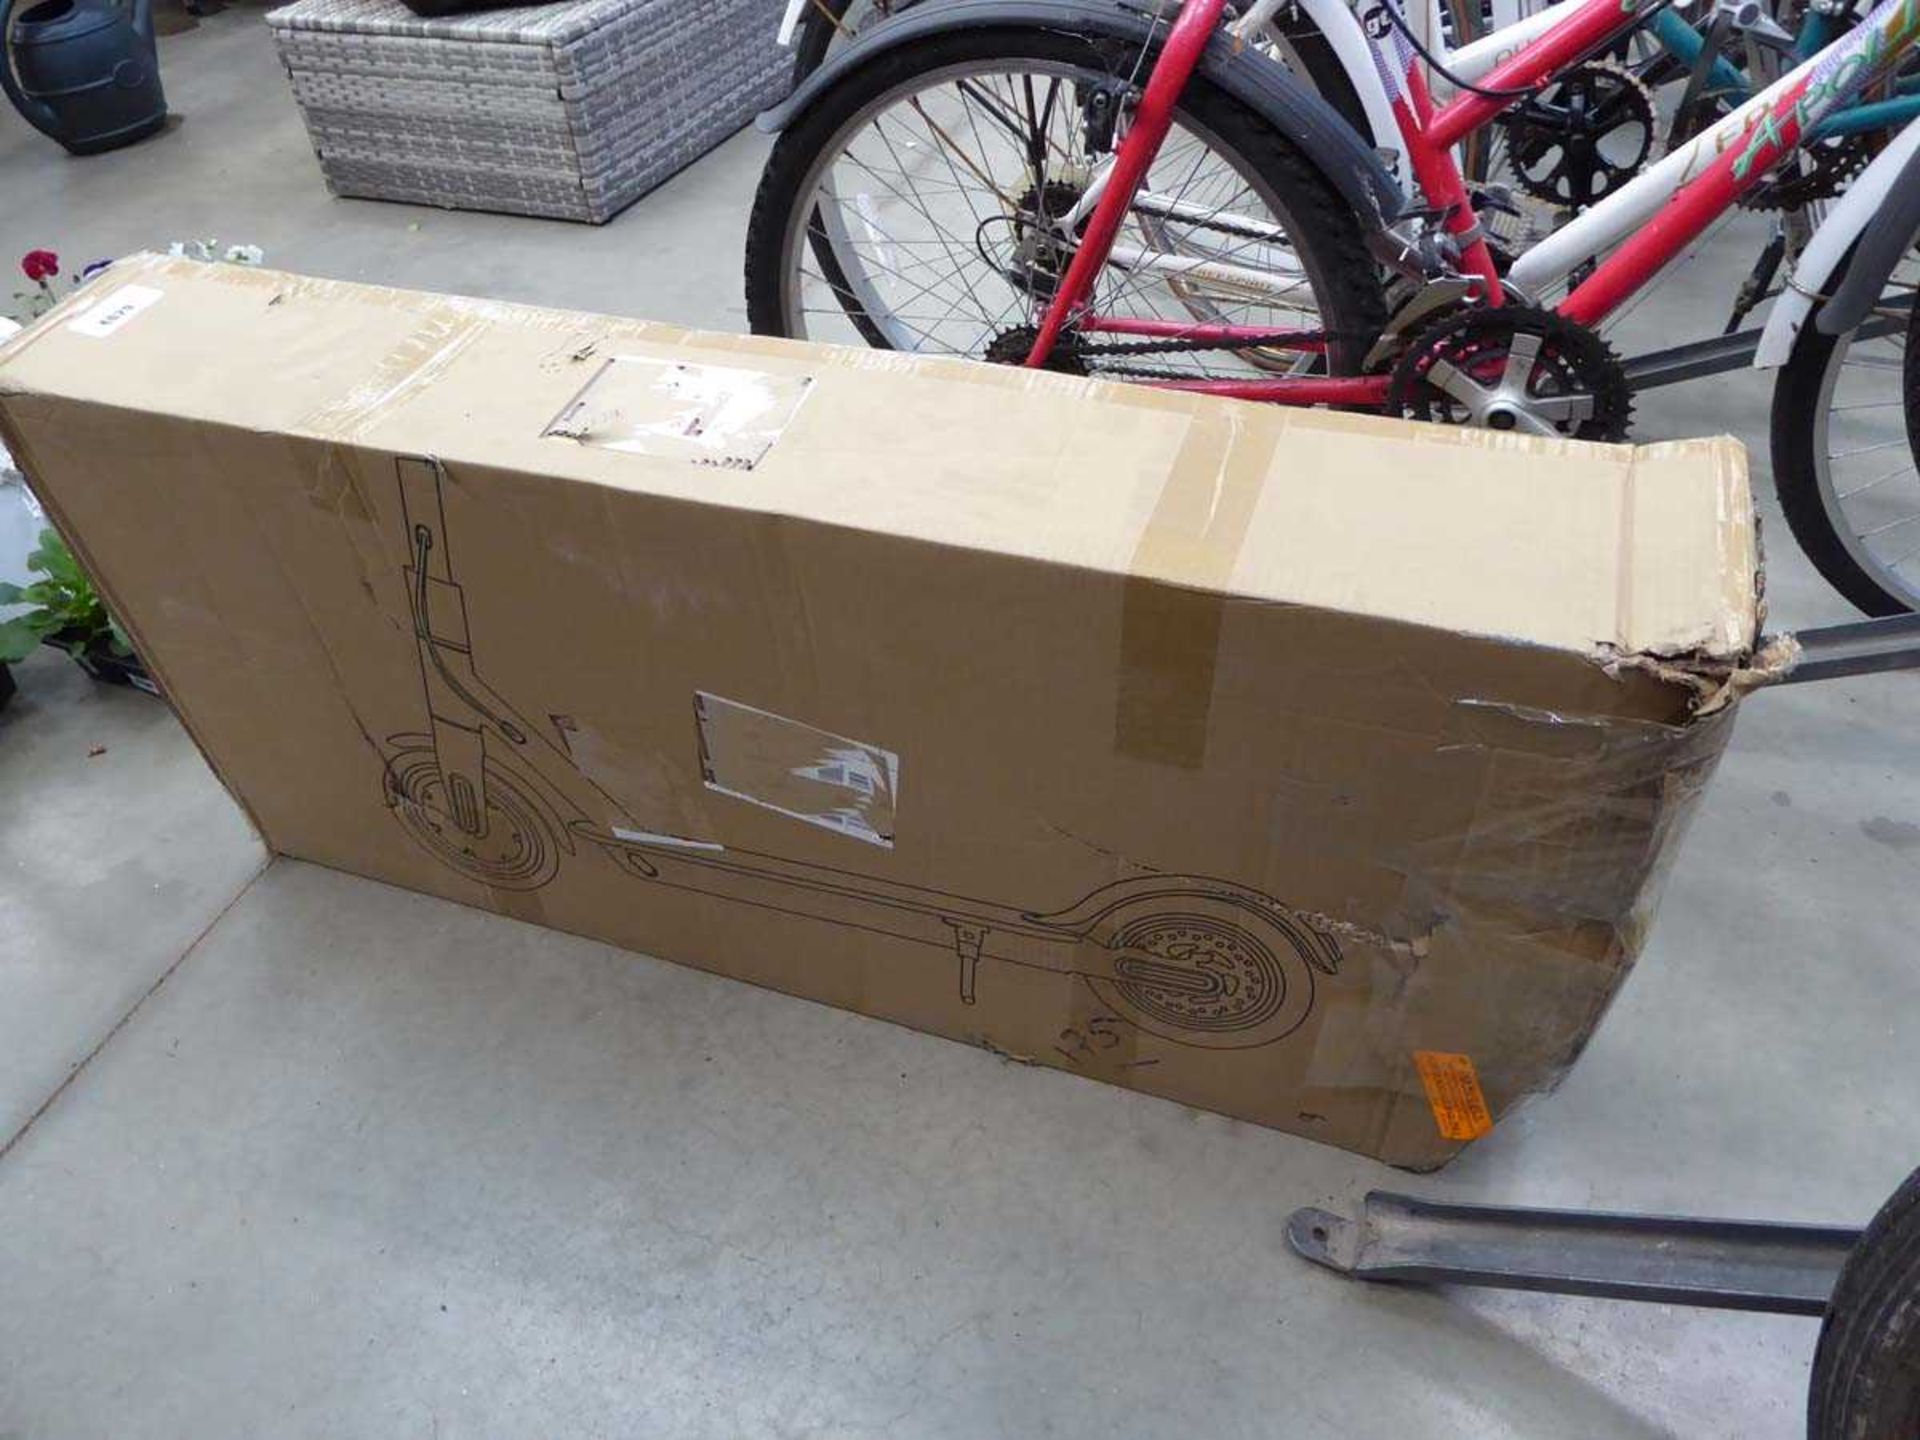 +VAT Boxed electric scooter